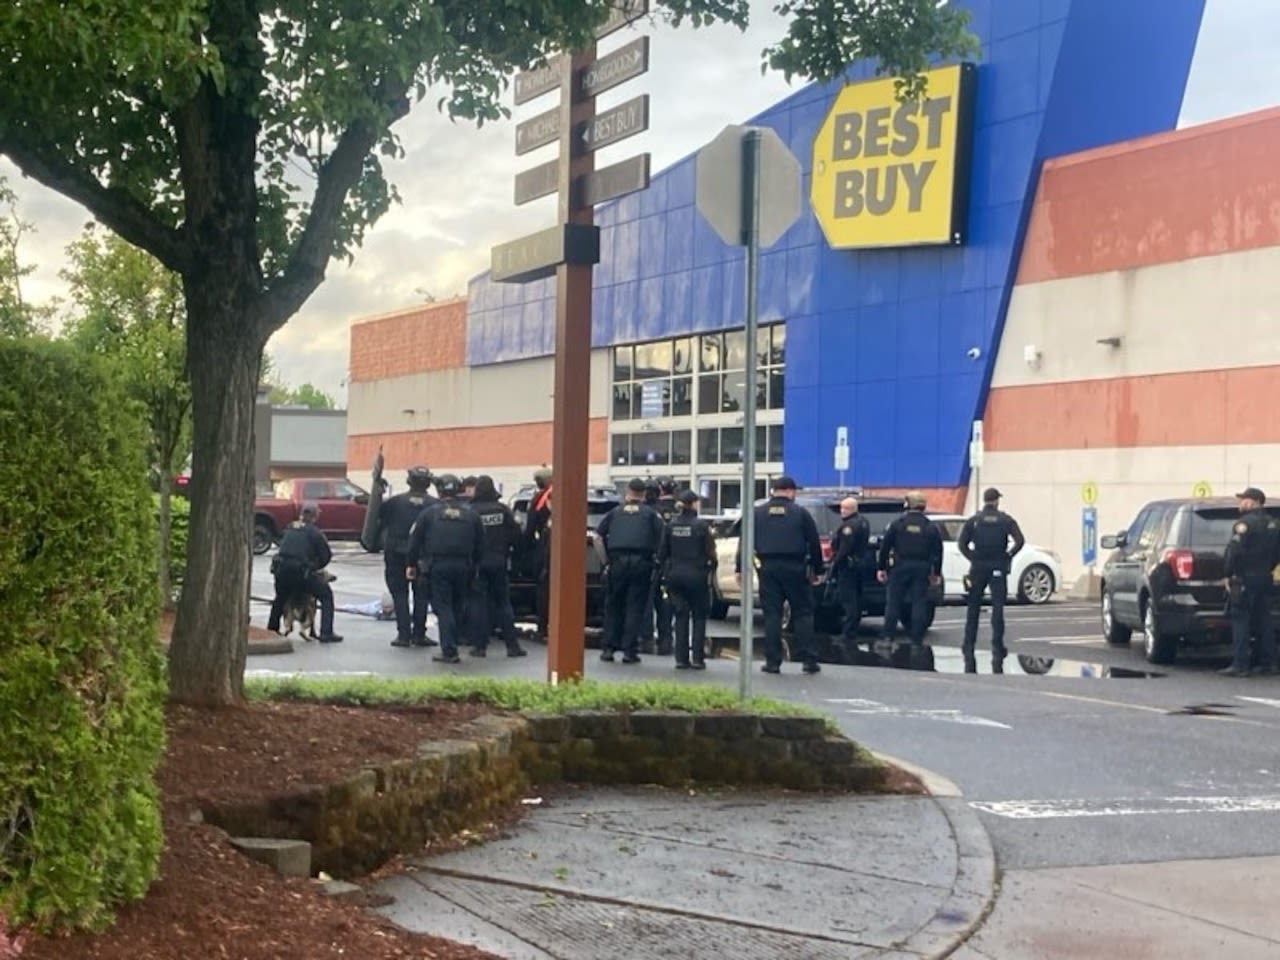 Portland police quietly evacuate entire Best Buy store, arrest robbery suspect who was left inside